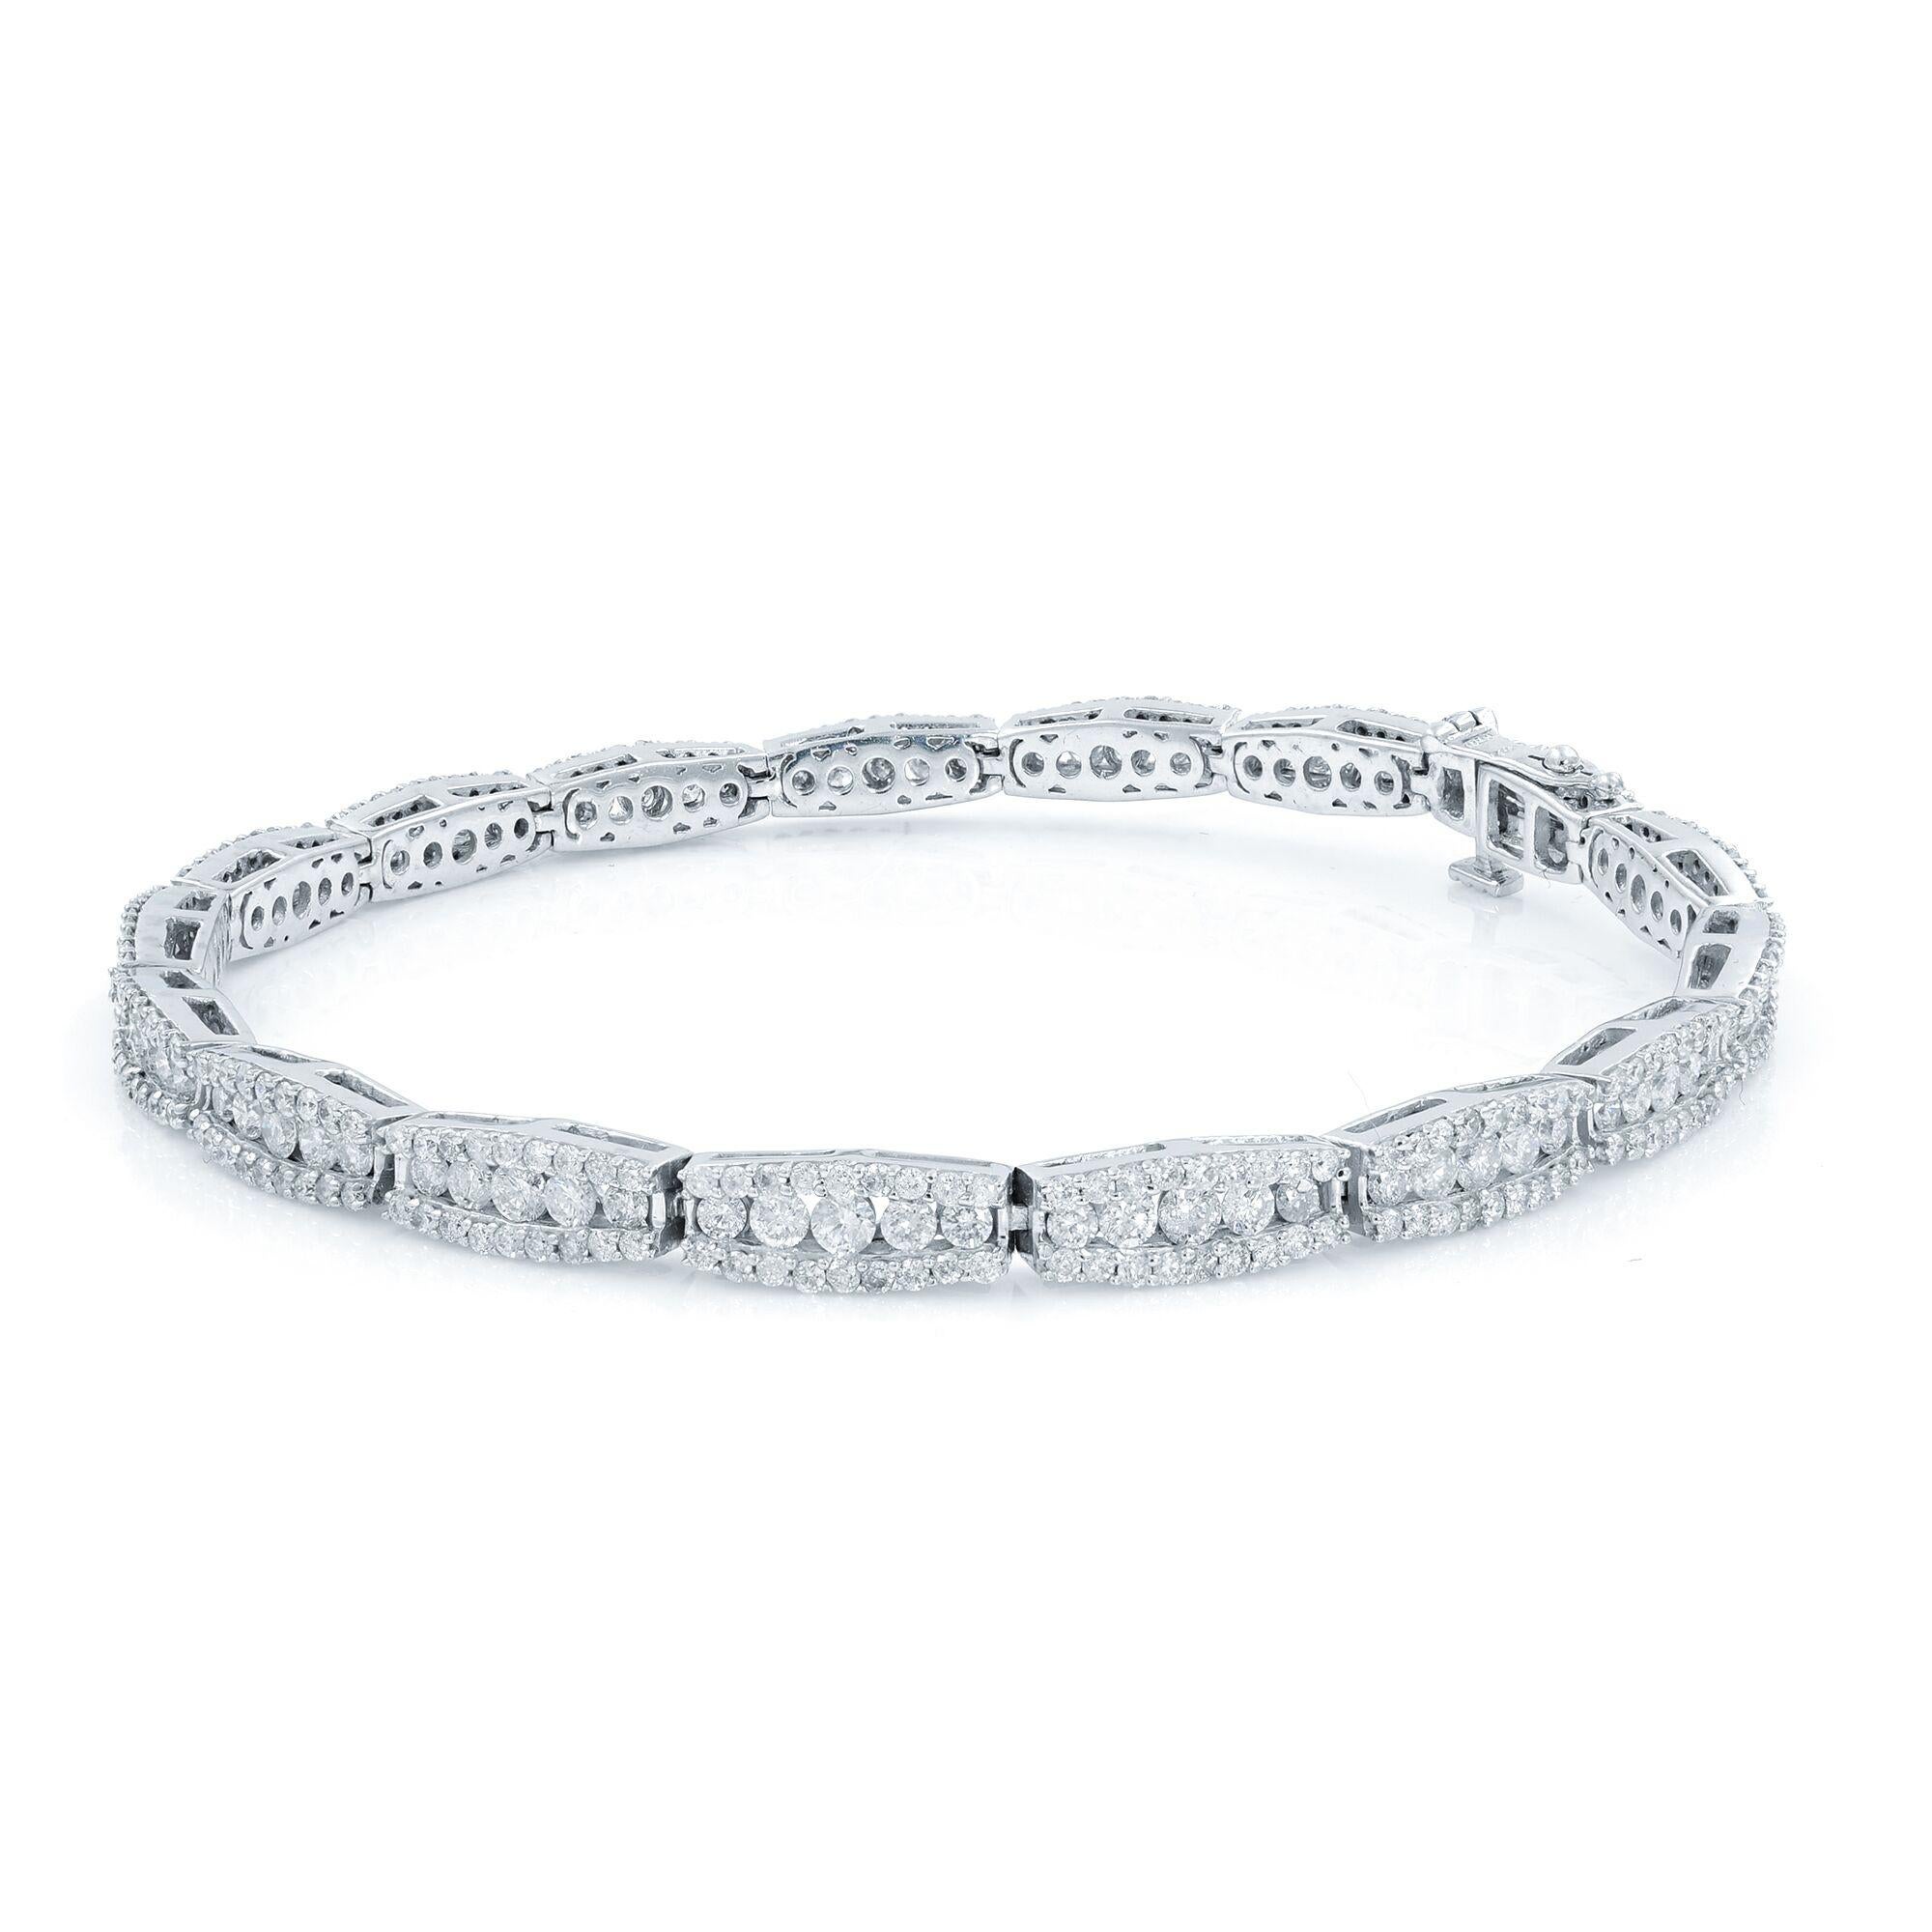 This chic and shining bracelet crafted in 14k white gold. A truly exemplary and elaborately rendered original Art Deco treasure. 3.5 inch wide by 7.5 inches in length. Total carat weight: 3.60.